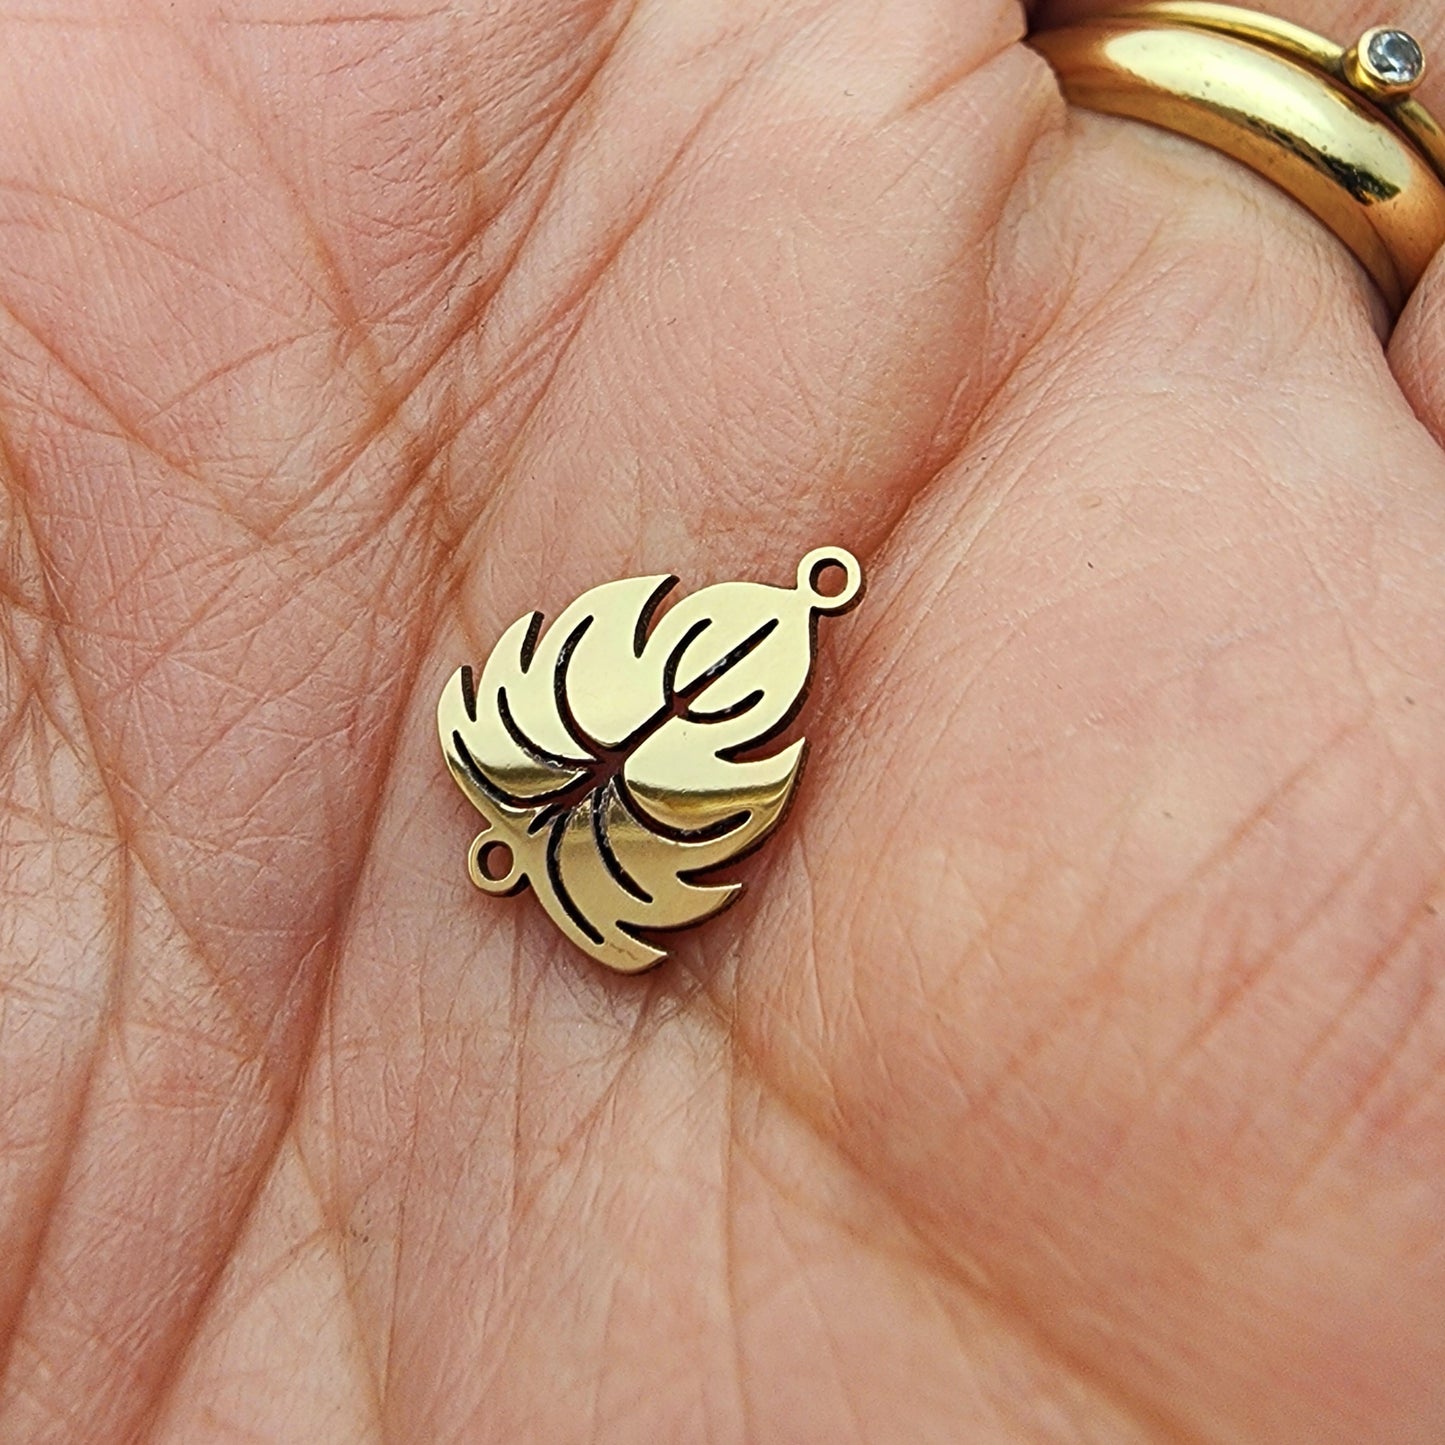 Leaf connector for permanent jewelry, gold filled, sterling silver, 14k and 10k gold